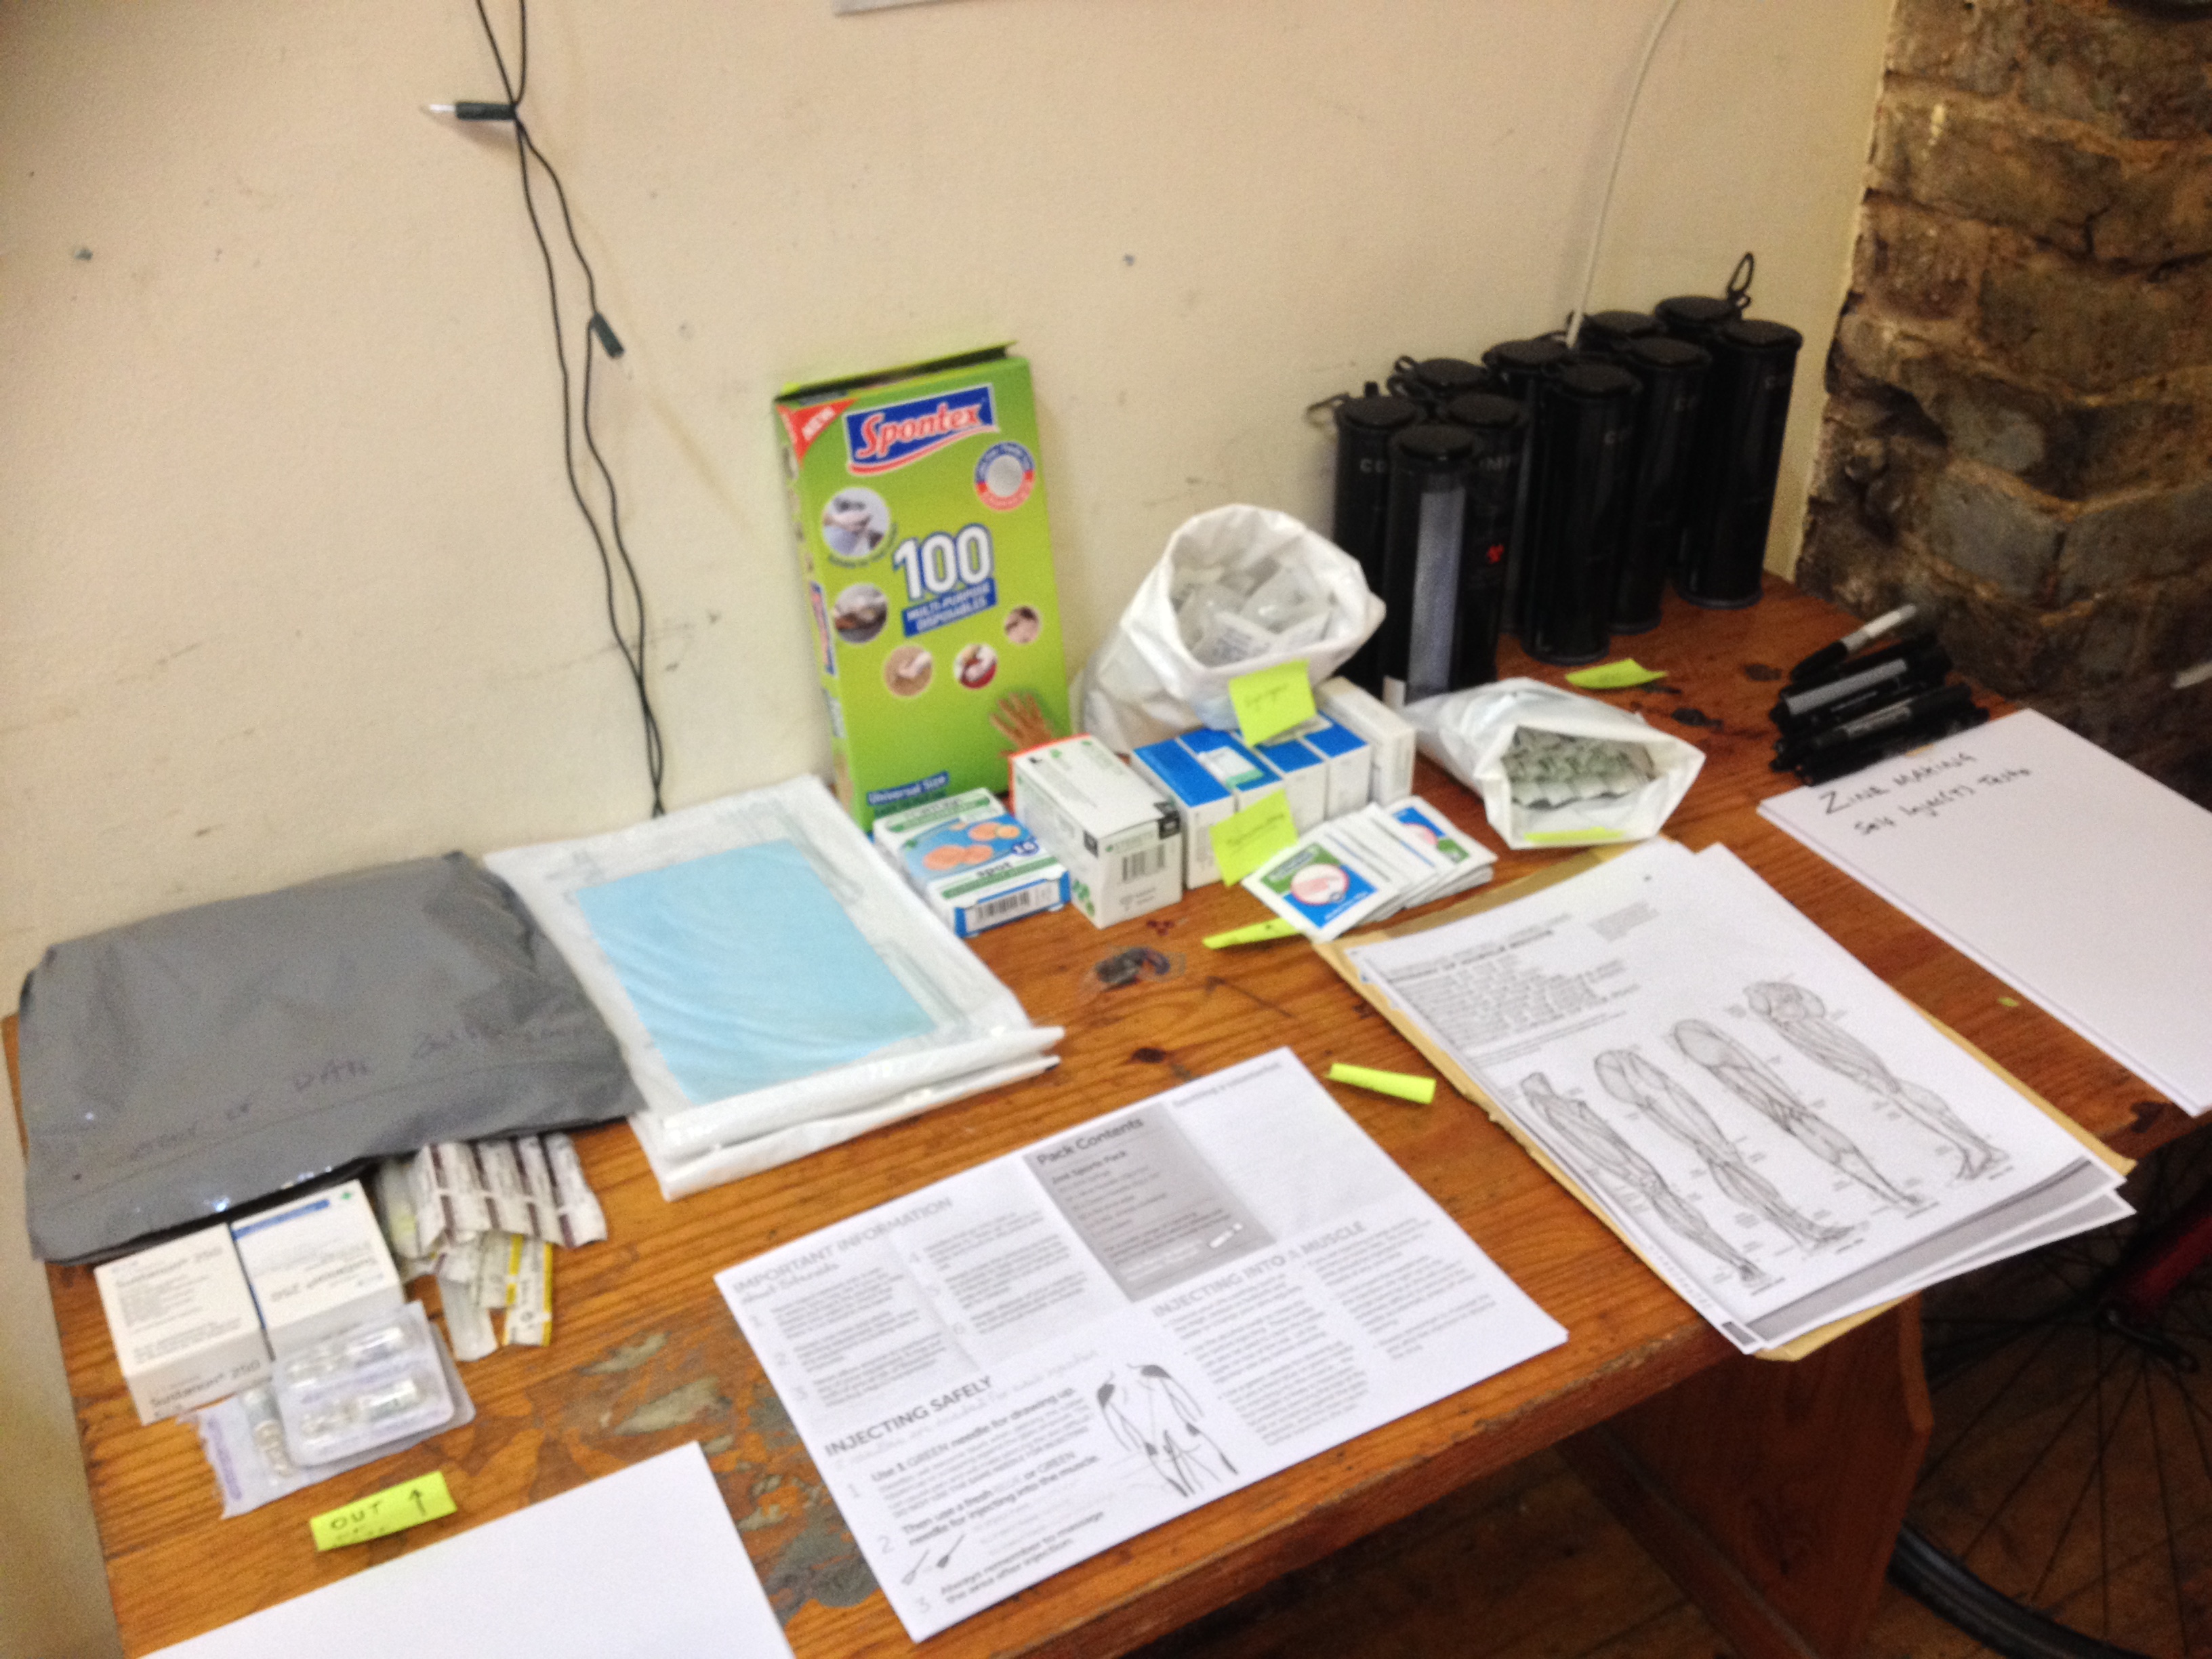 Photo of workshop materials such as cleaning wipes, printed handouts, and disposable gloves